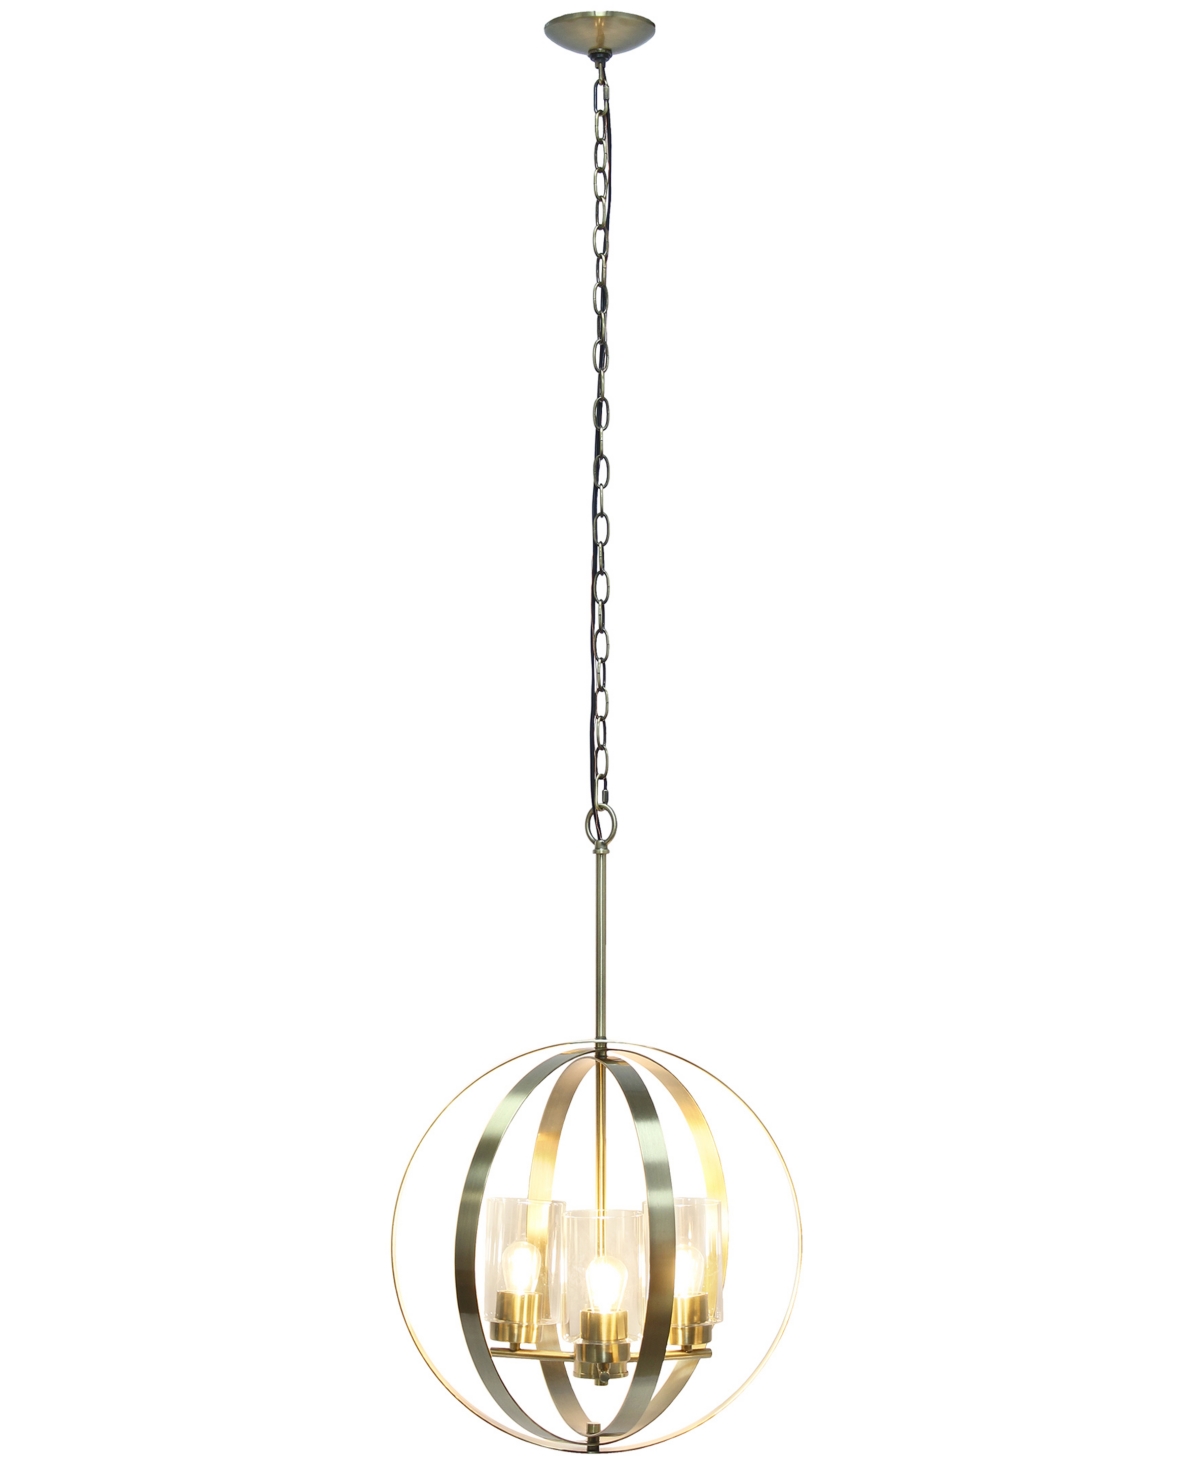 All The Rages 3-light 18" Adjustable Industrial Globe Hanging Metal And Clear Glass Ceiling Pendant In Antique Brass